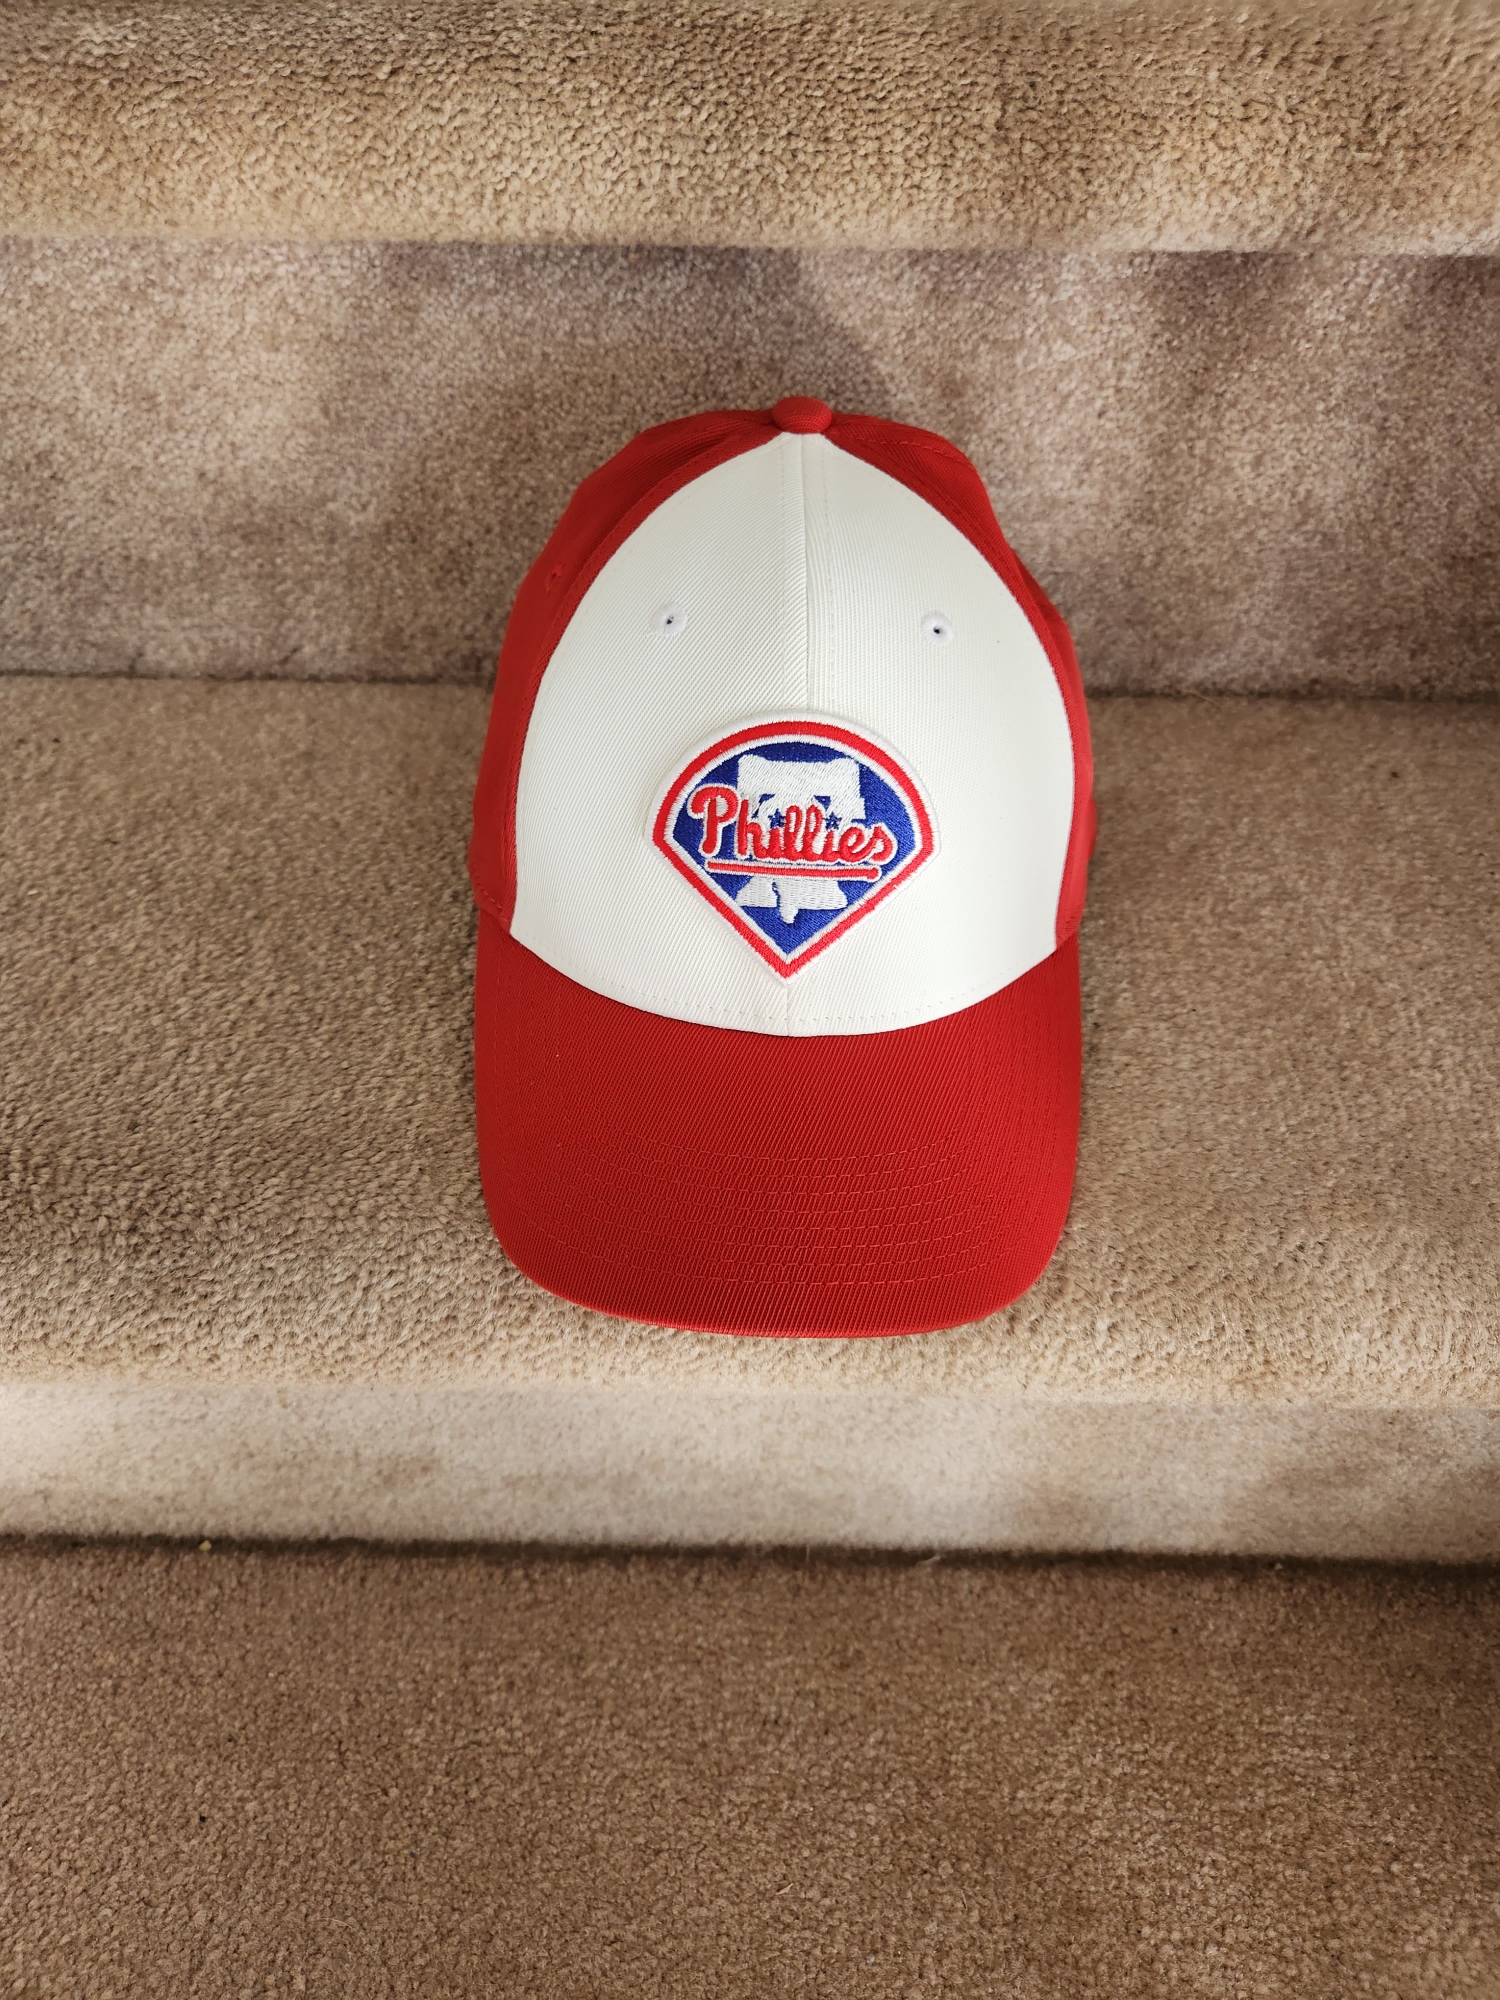 Philadelphia Phillies One Size Fits All Nike Hat